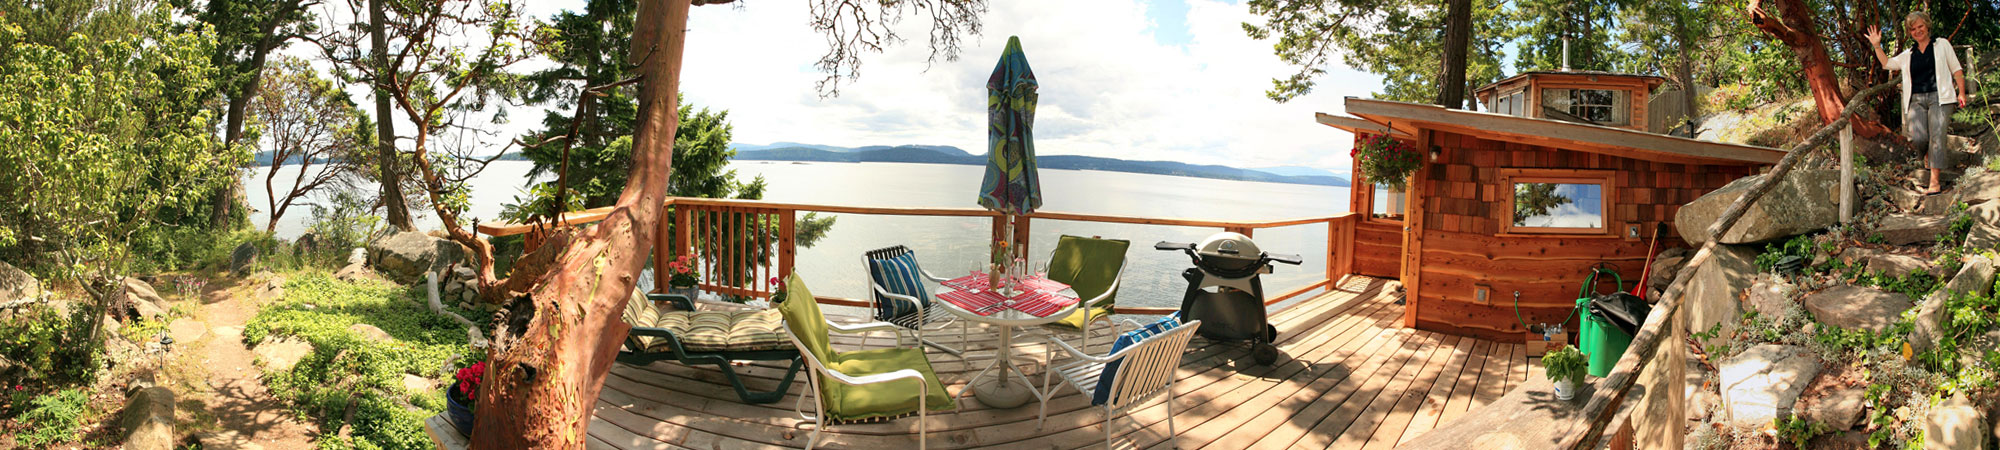 The Cliffhouse Treehouse Welcome You To Galiano Island